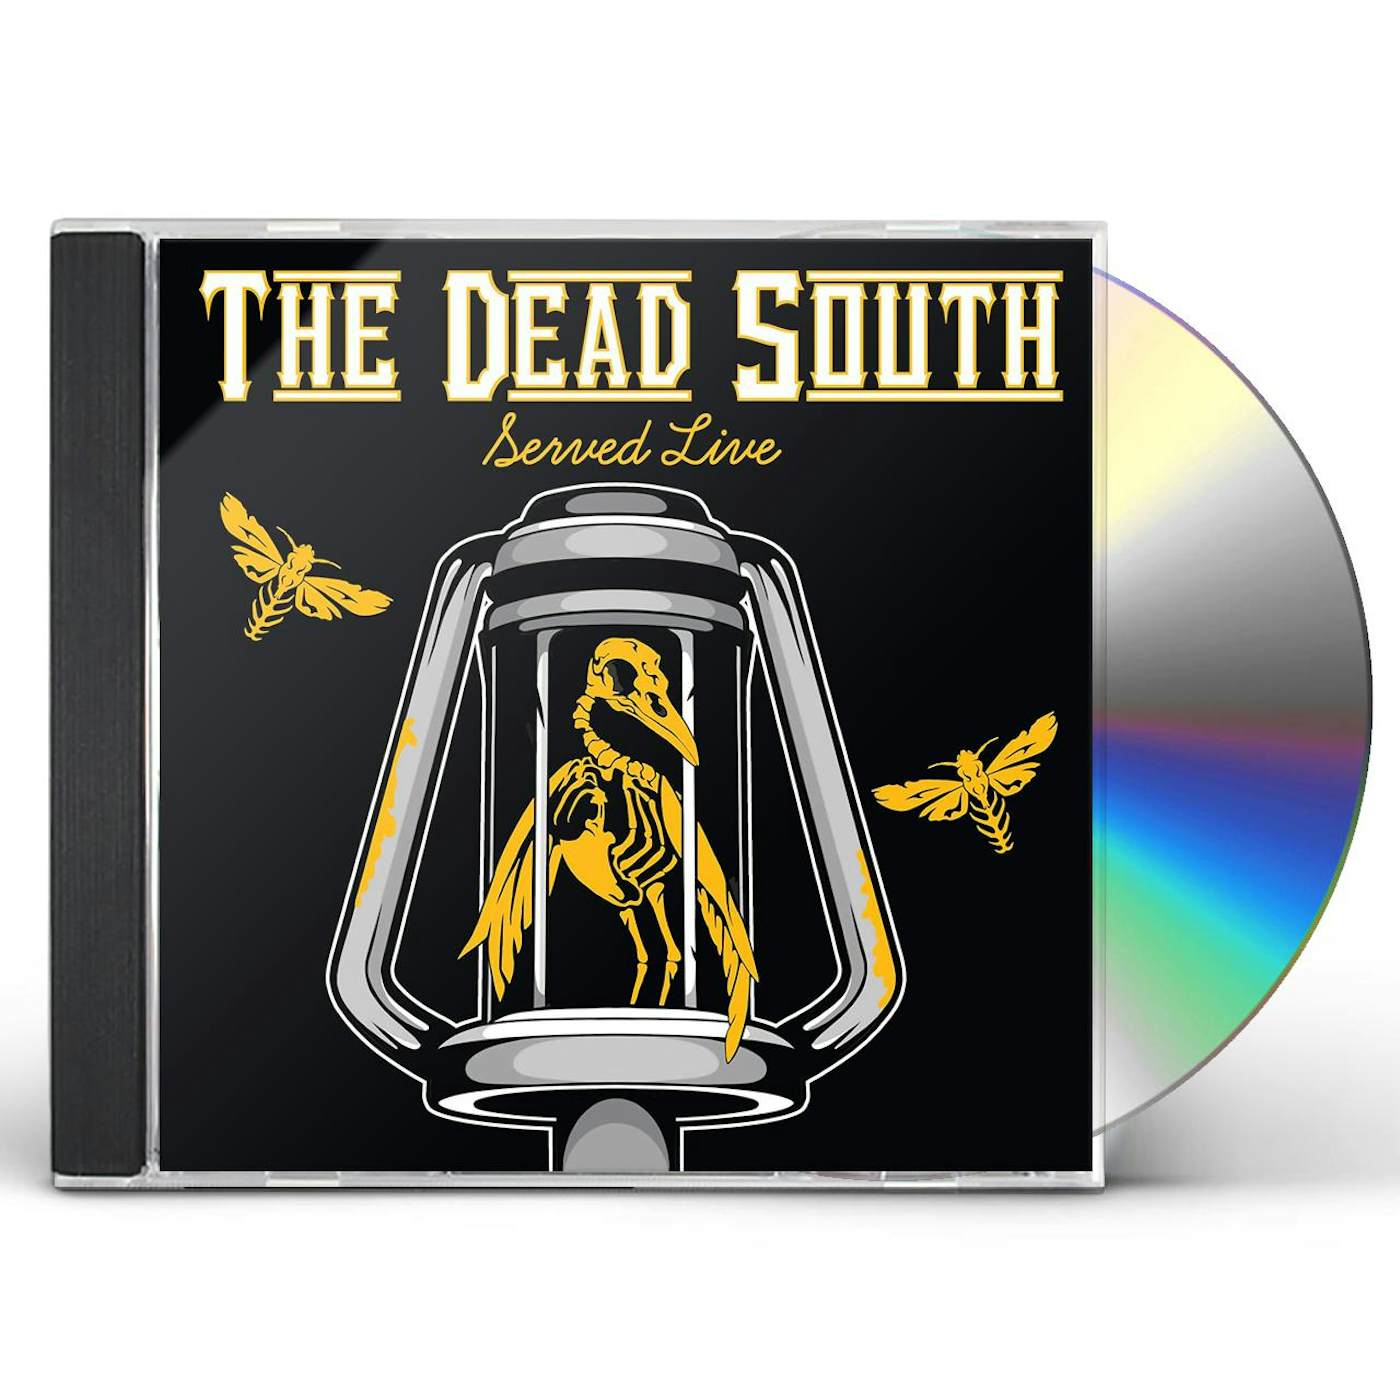 The Dead South SERVED LIVE CD